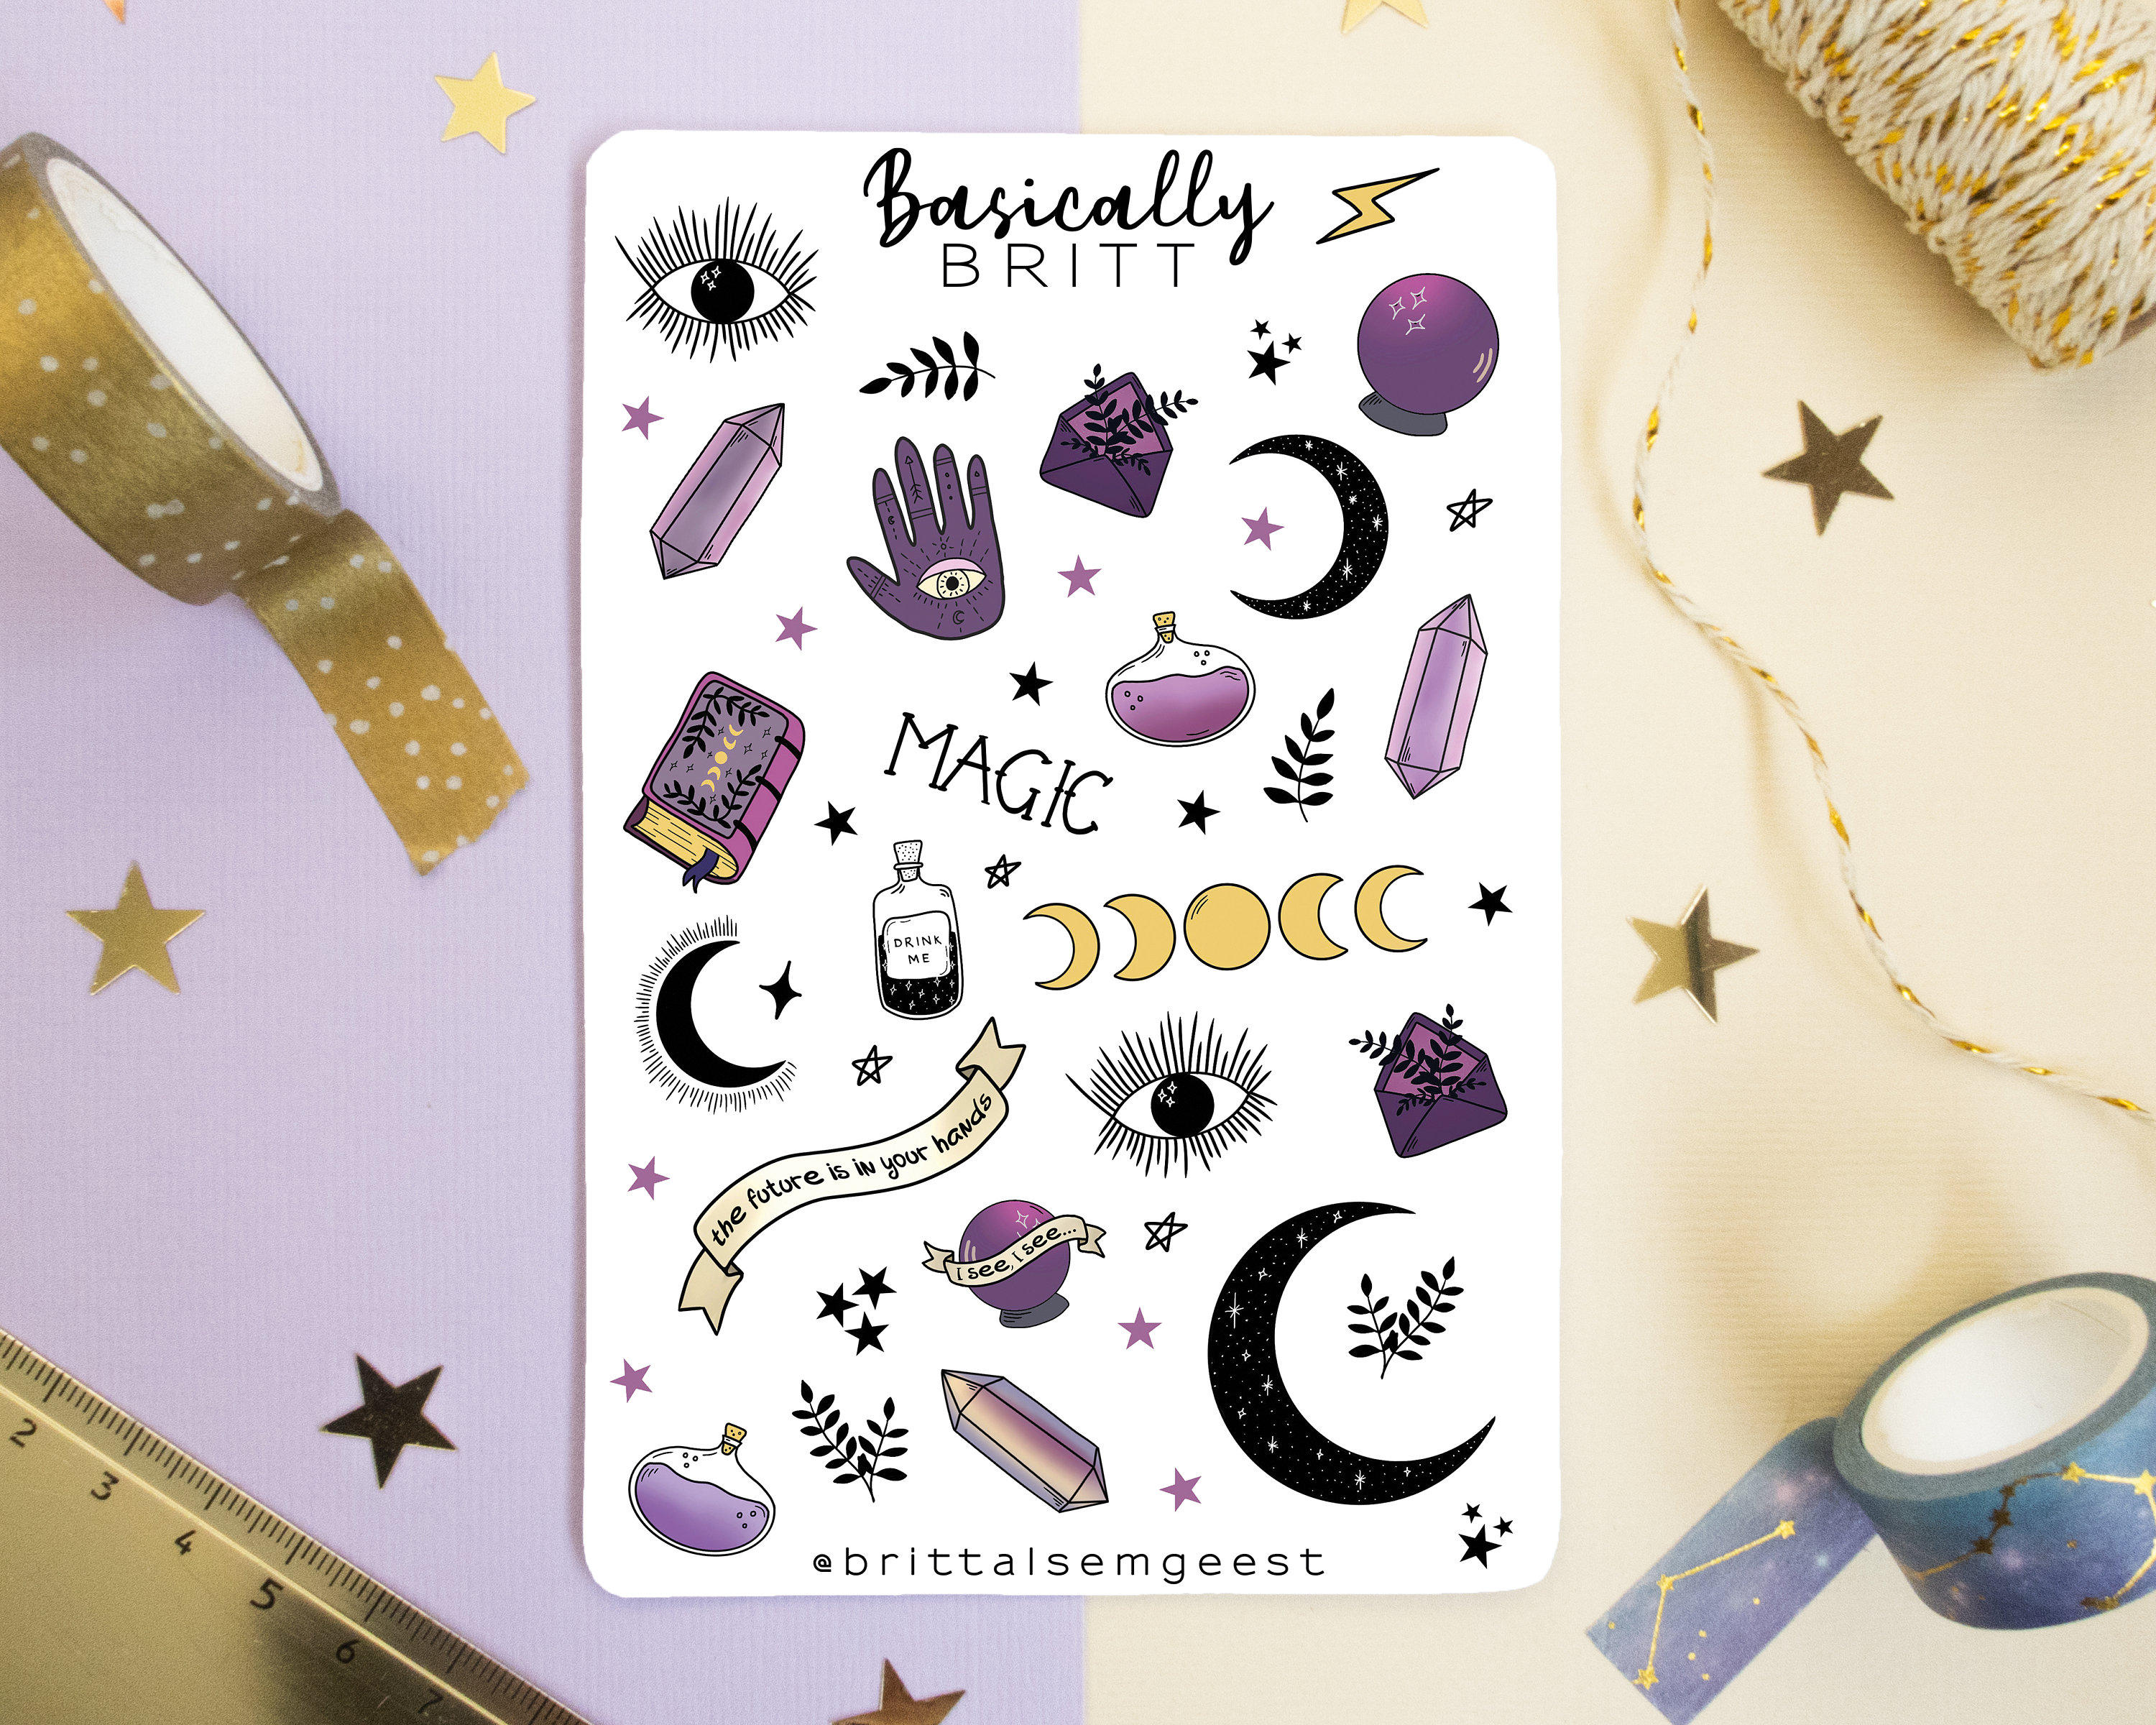 Tarot Sticker Sheet, Planner Stickers, Tarot Meaning Stickers, Witchy  Stickers, Bullet Journal Stickers, Deco Stickers, Affirmation Stickers 